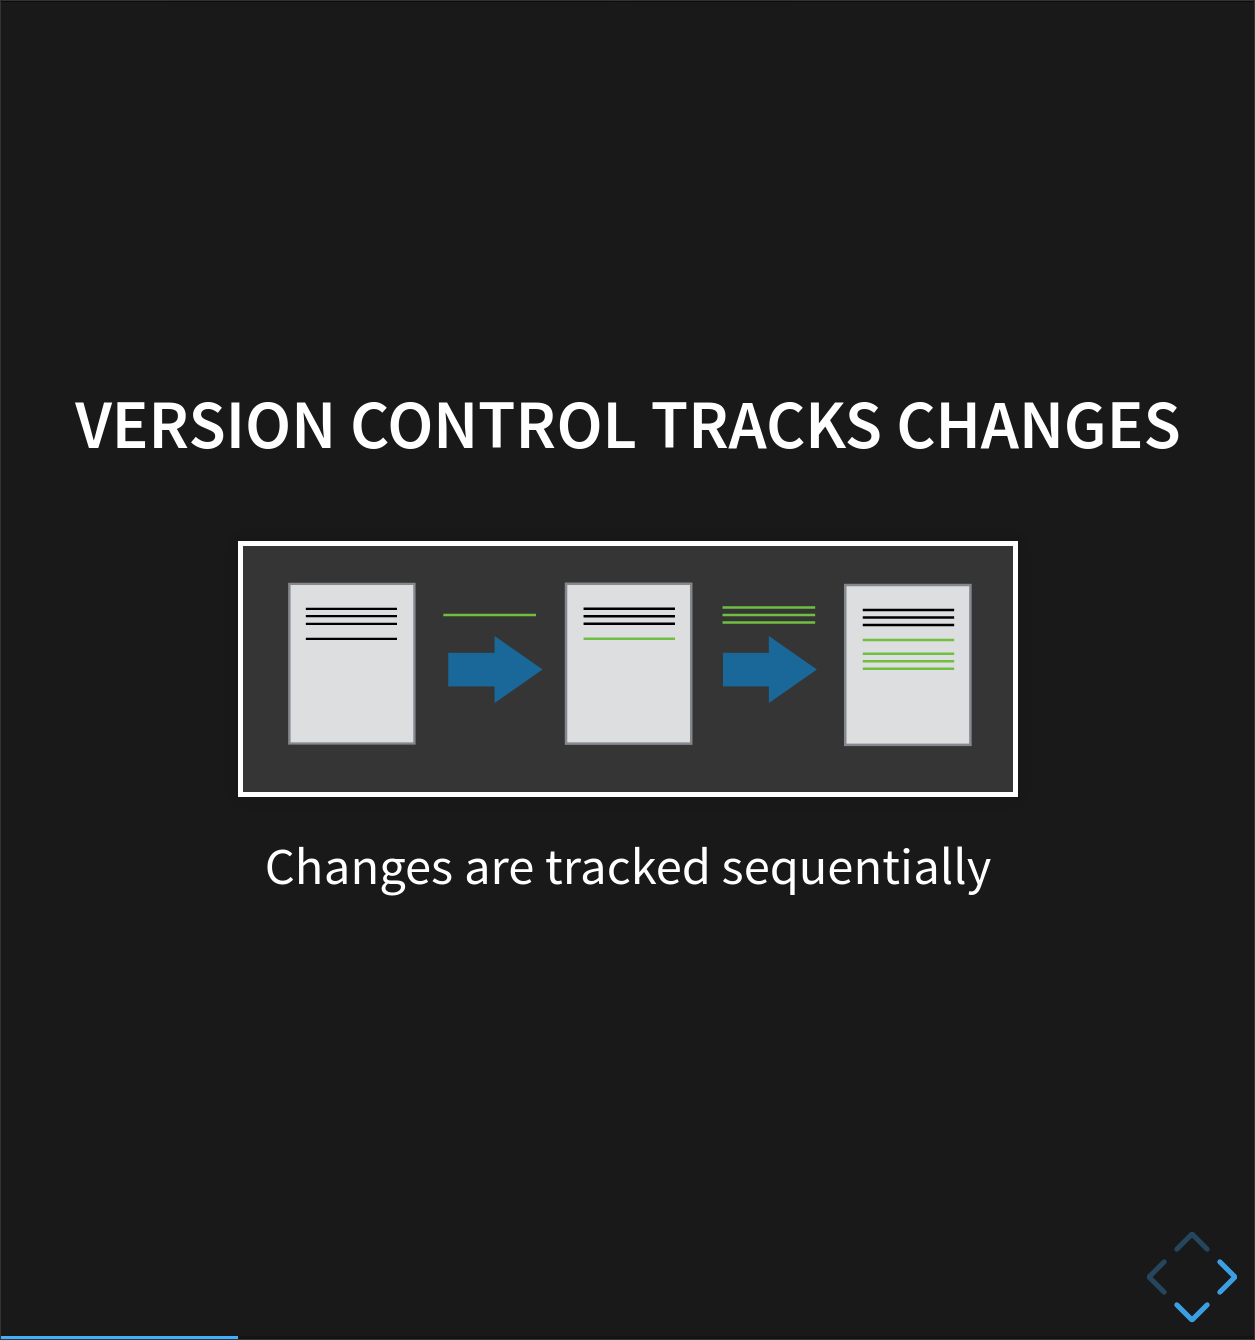 Changes are tracked sequentially